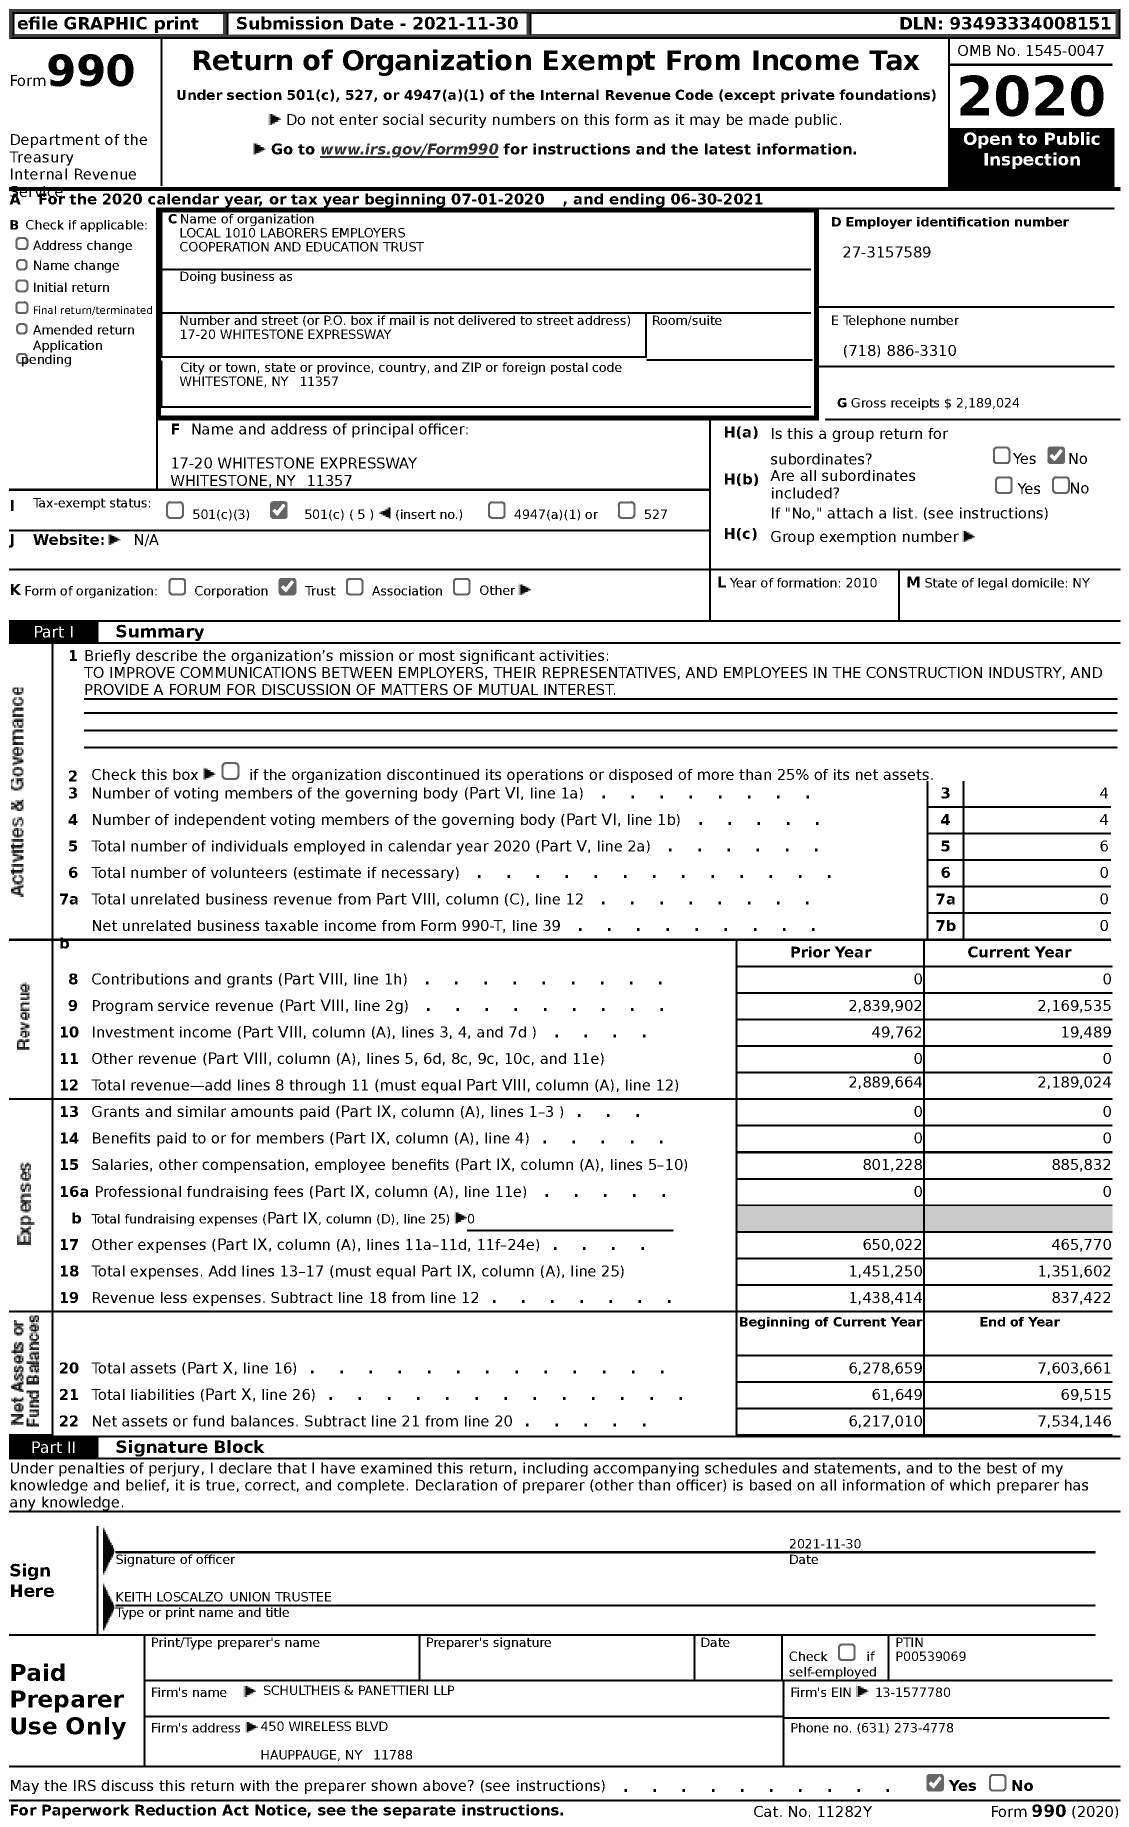 Image of first page of 2020 Form 990 for Local 1010 Laborers Employers Cooperation and Education Trust